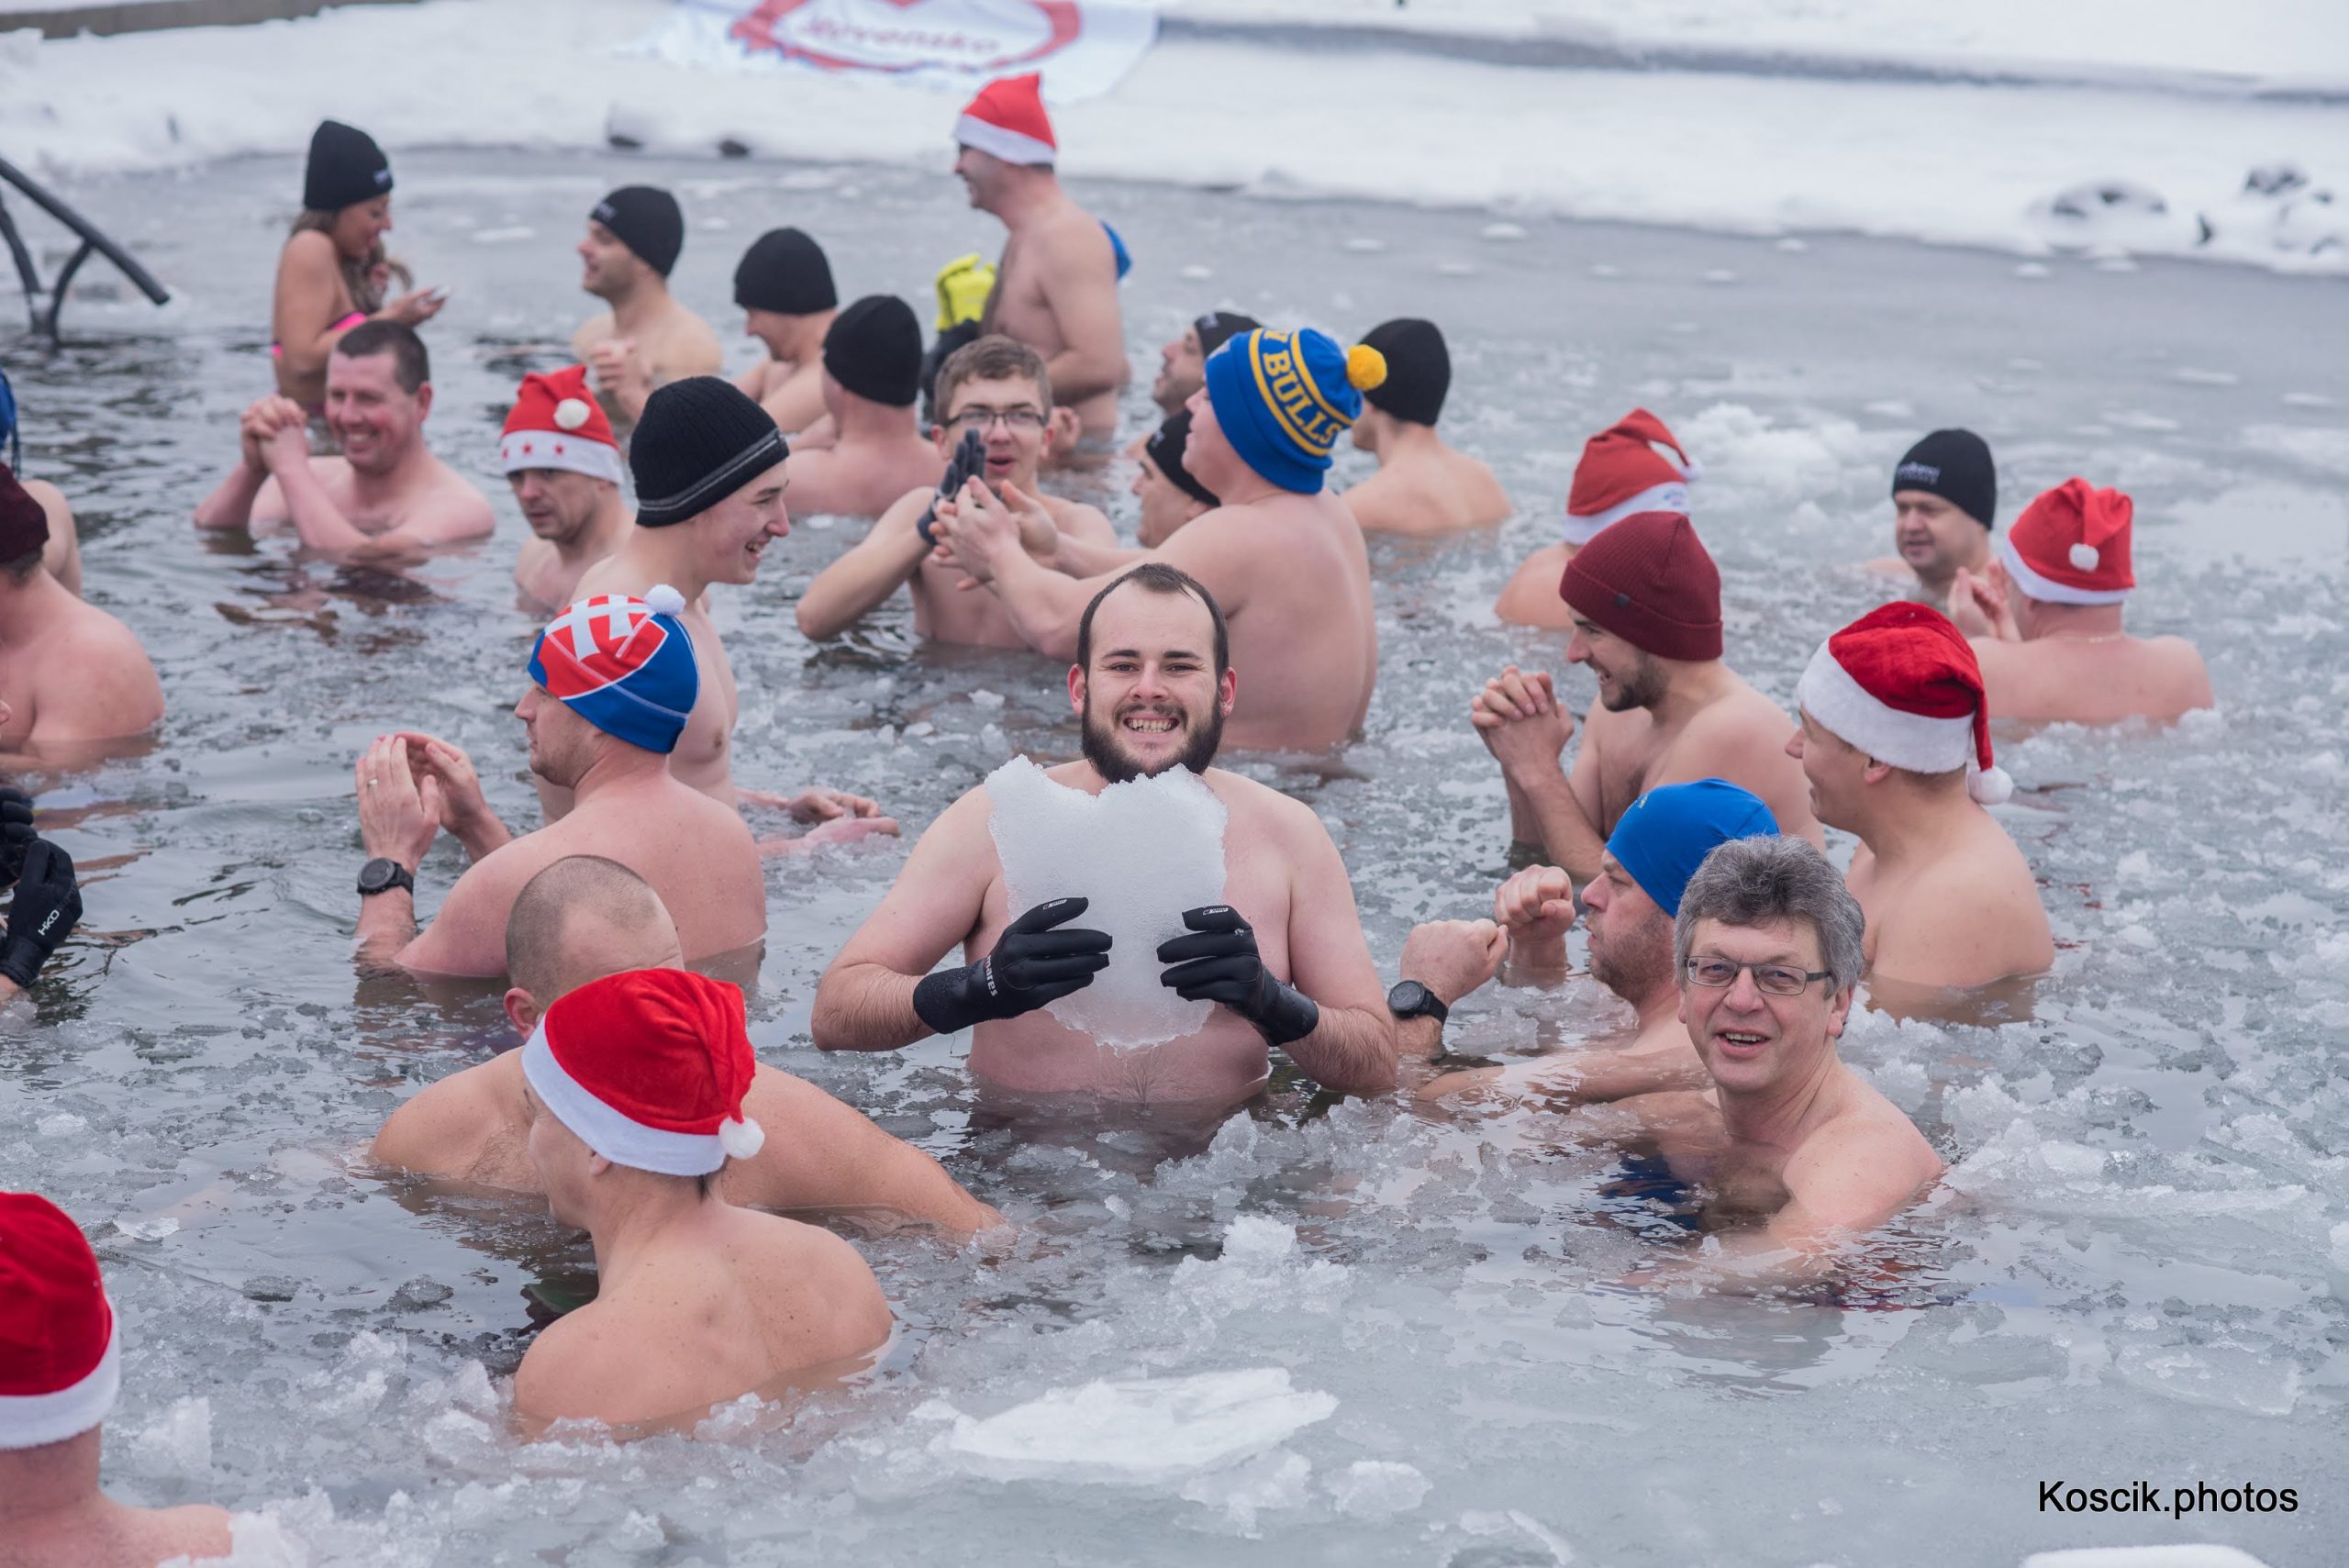 Ondrej: I have been inspired by my in-laws, who started cold water swimming in their fifties